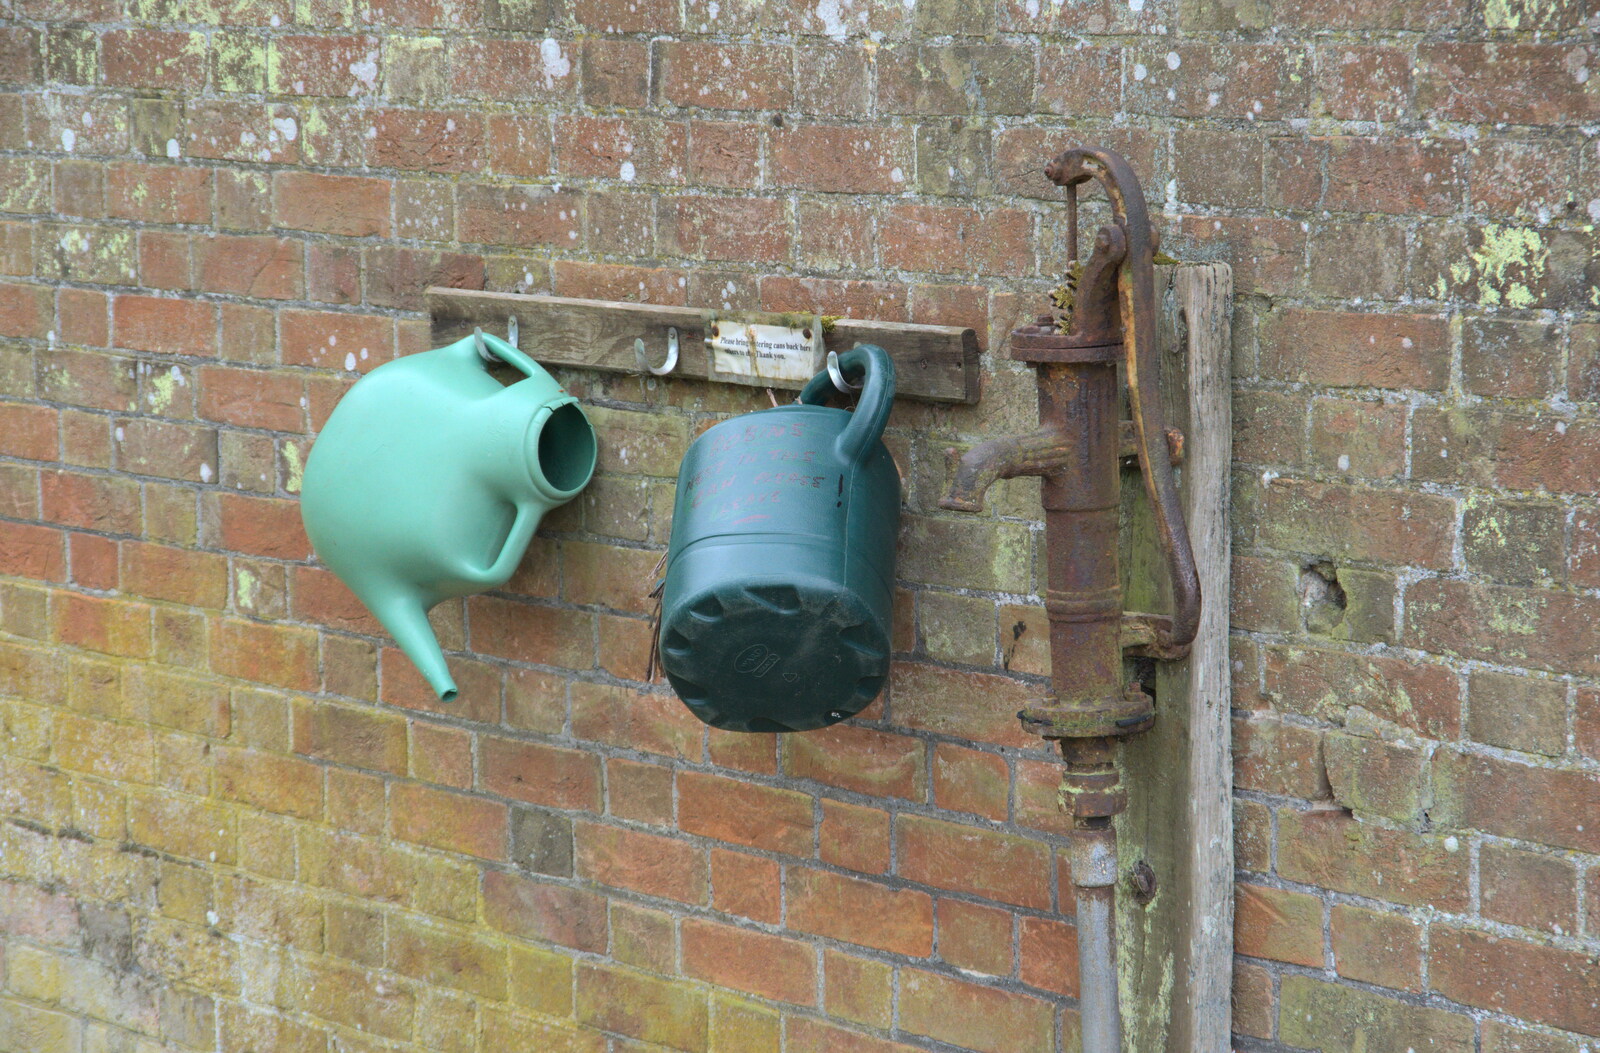 An old water pump and some watering cans from The Quest for Rapsy Tapsy Lane, Eye, Suffolk - 6th May 2020